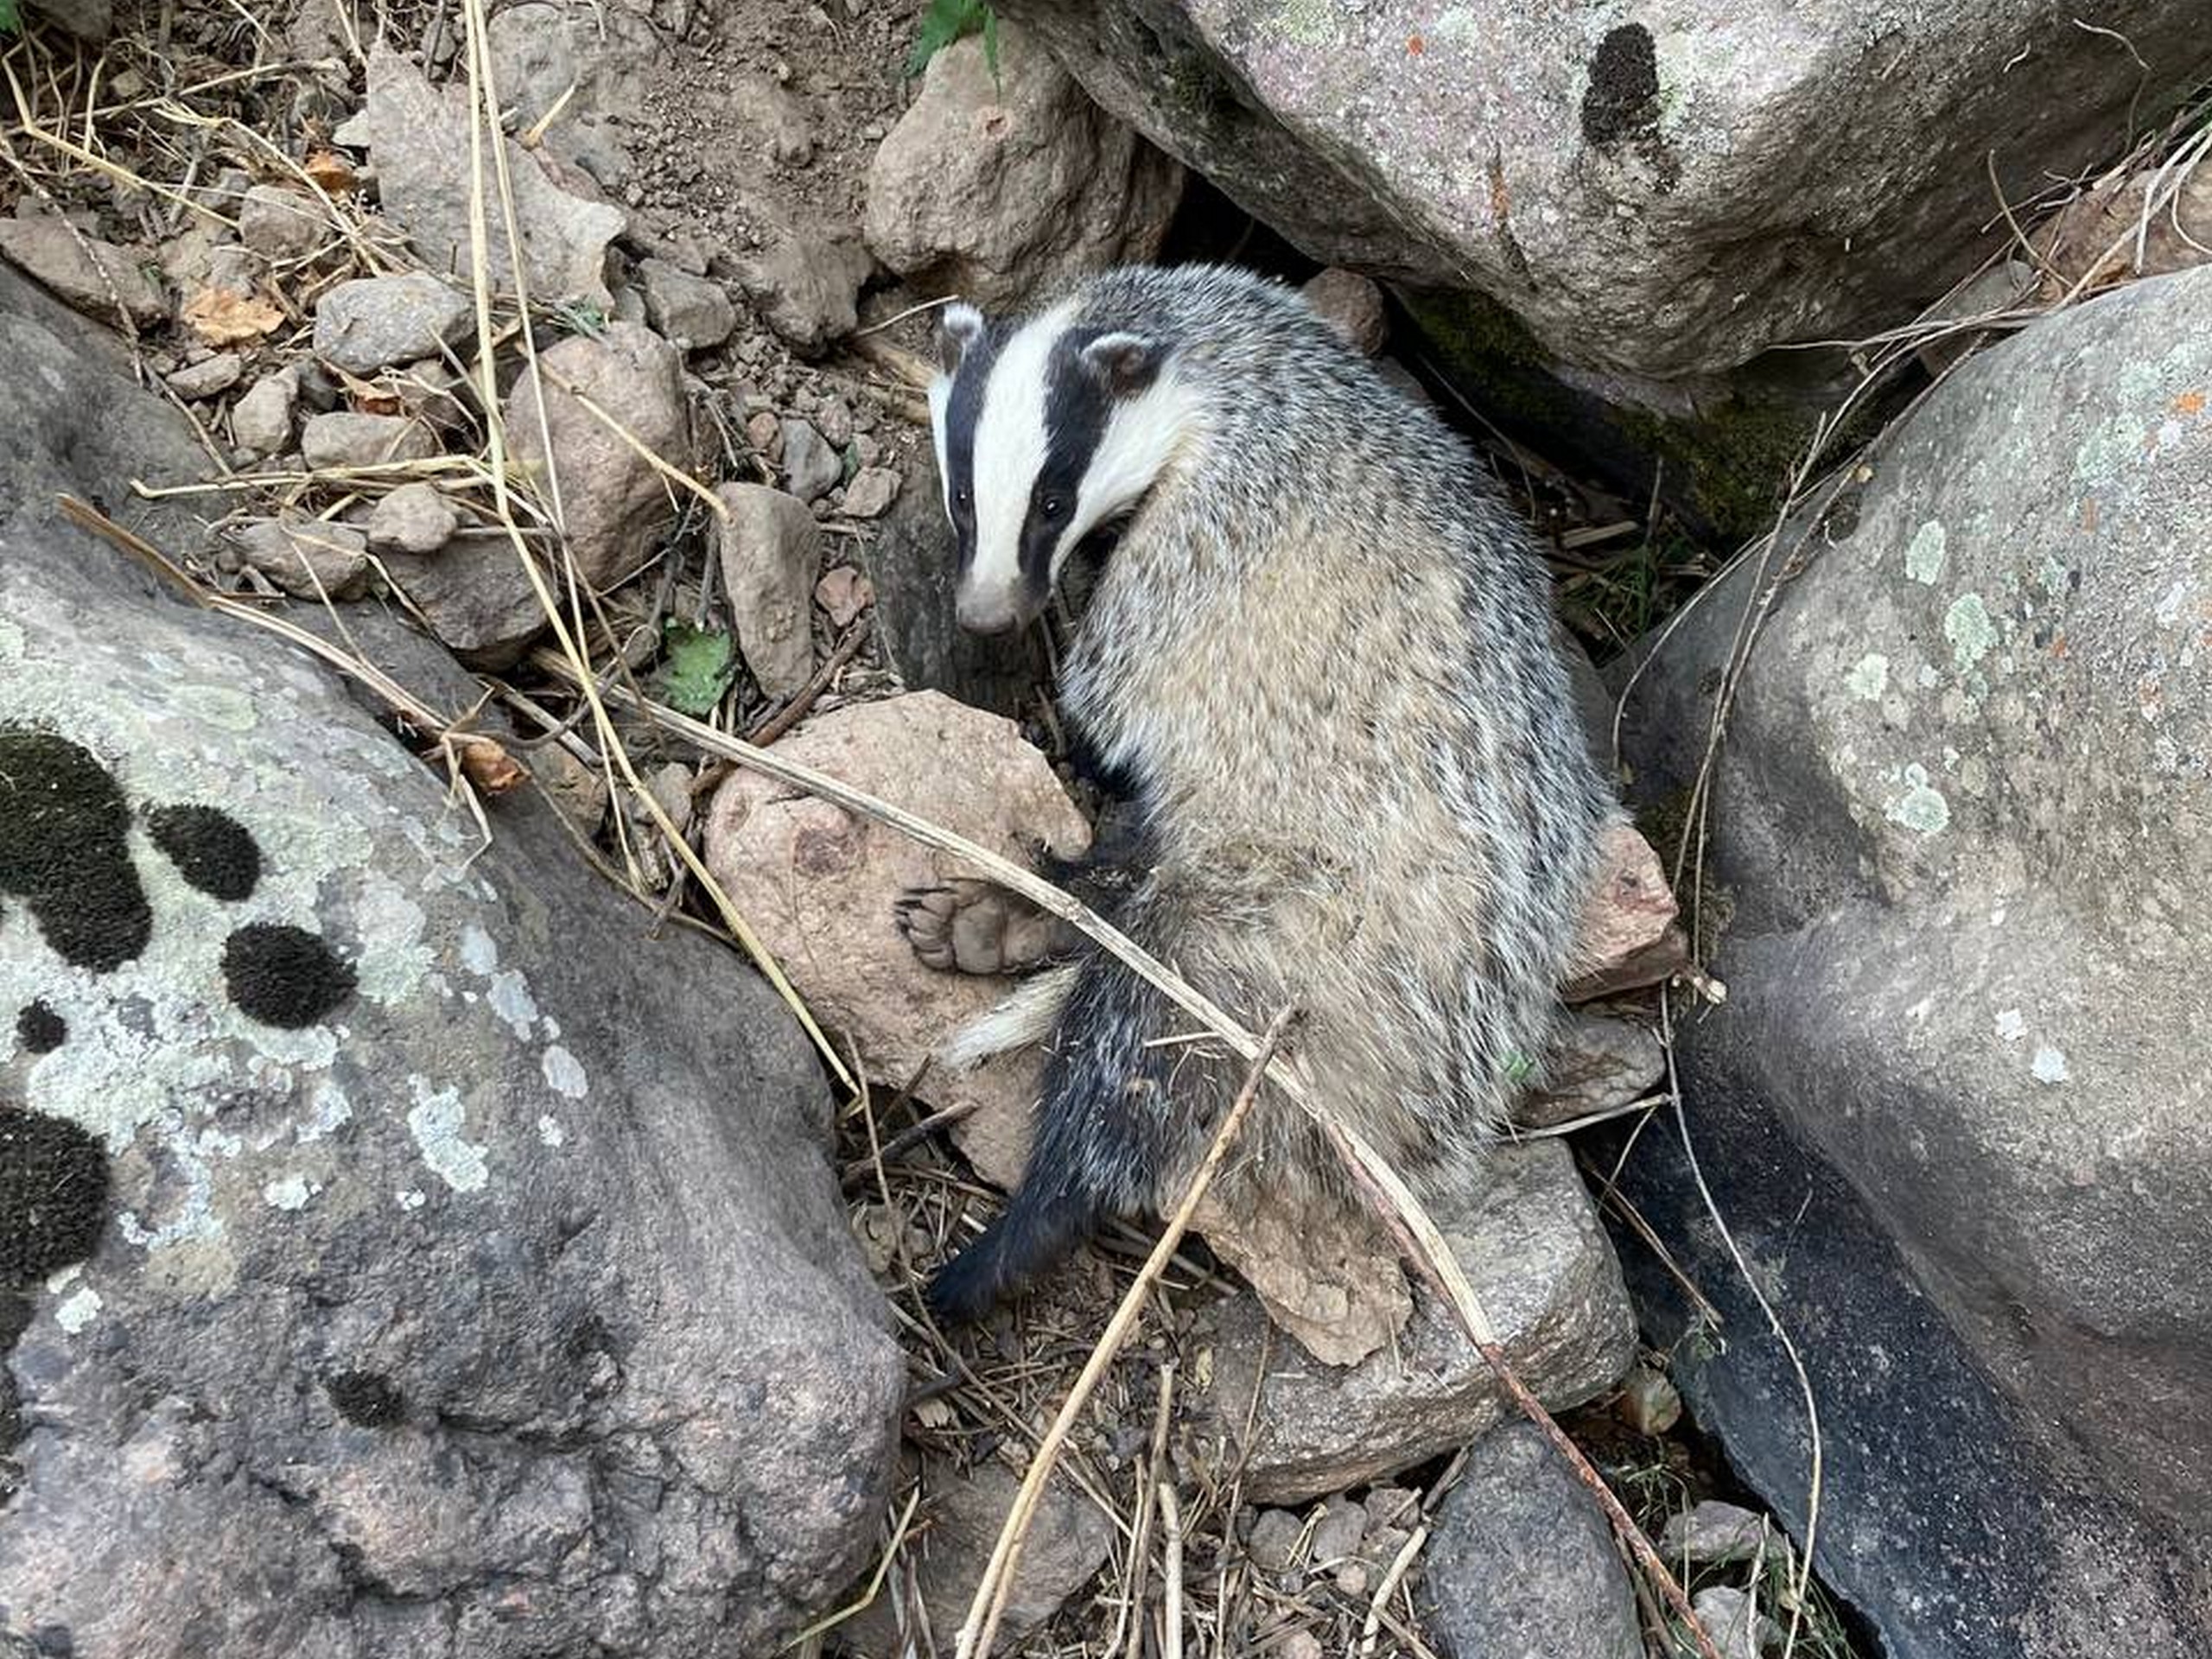 Badger met while hiking in the mountains of Uzbekistan